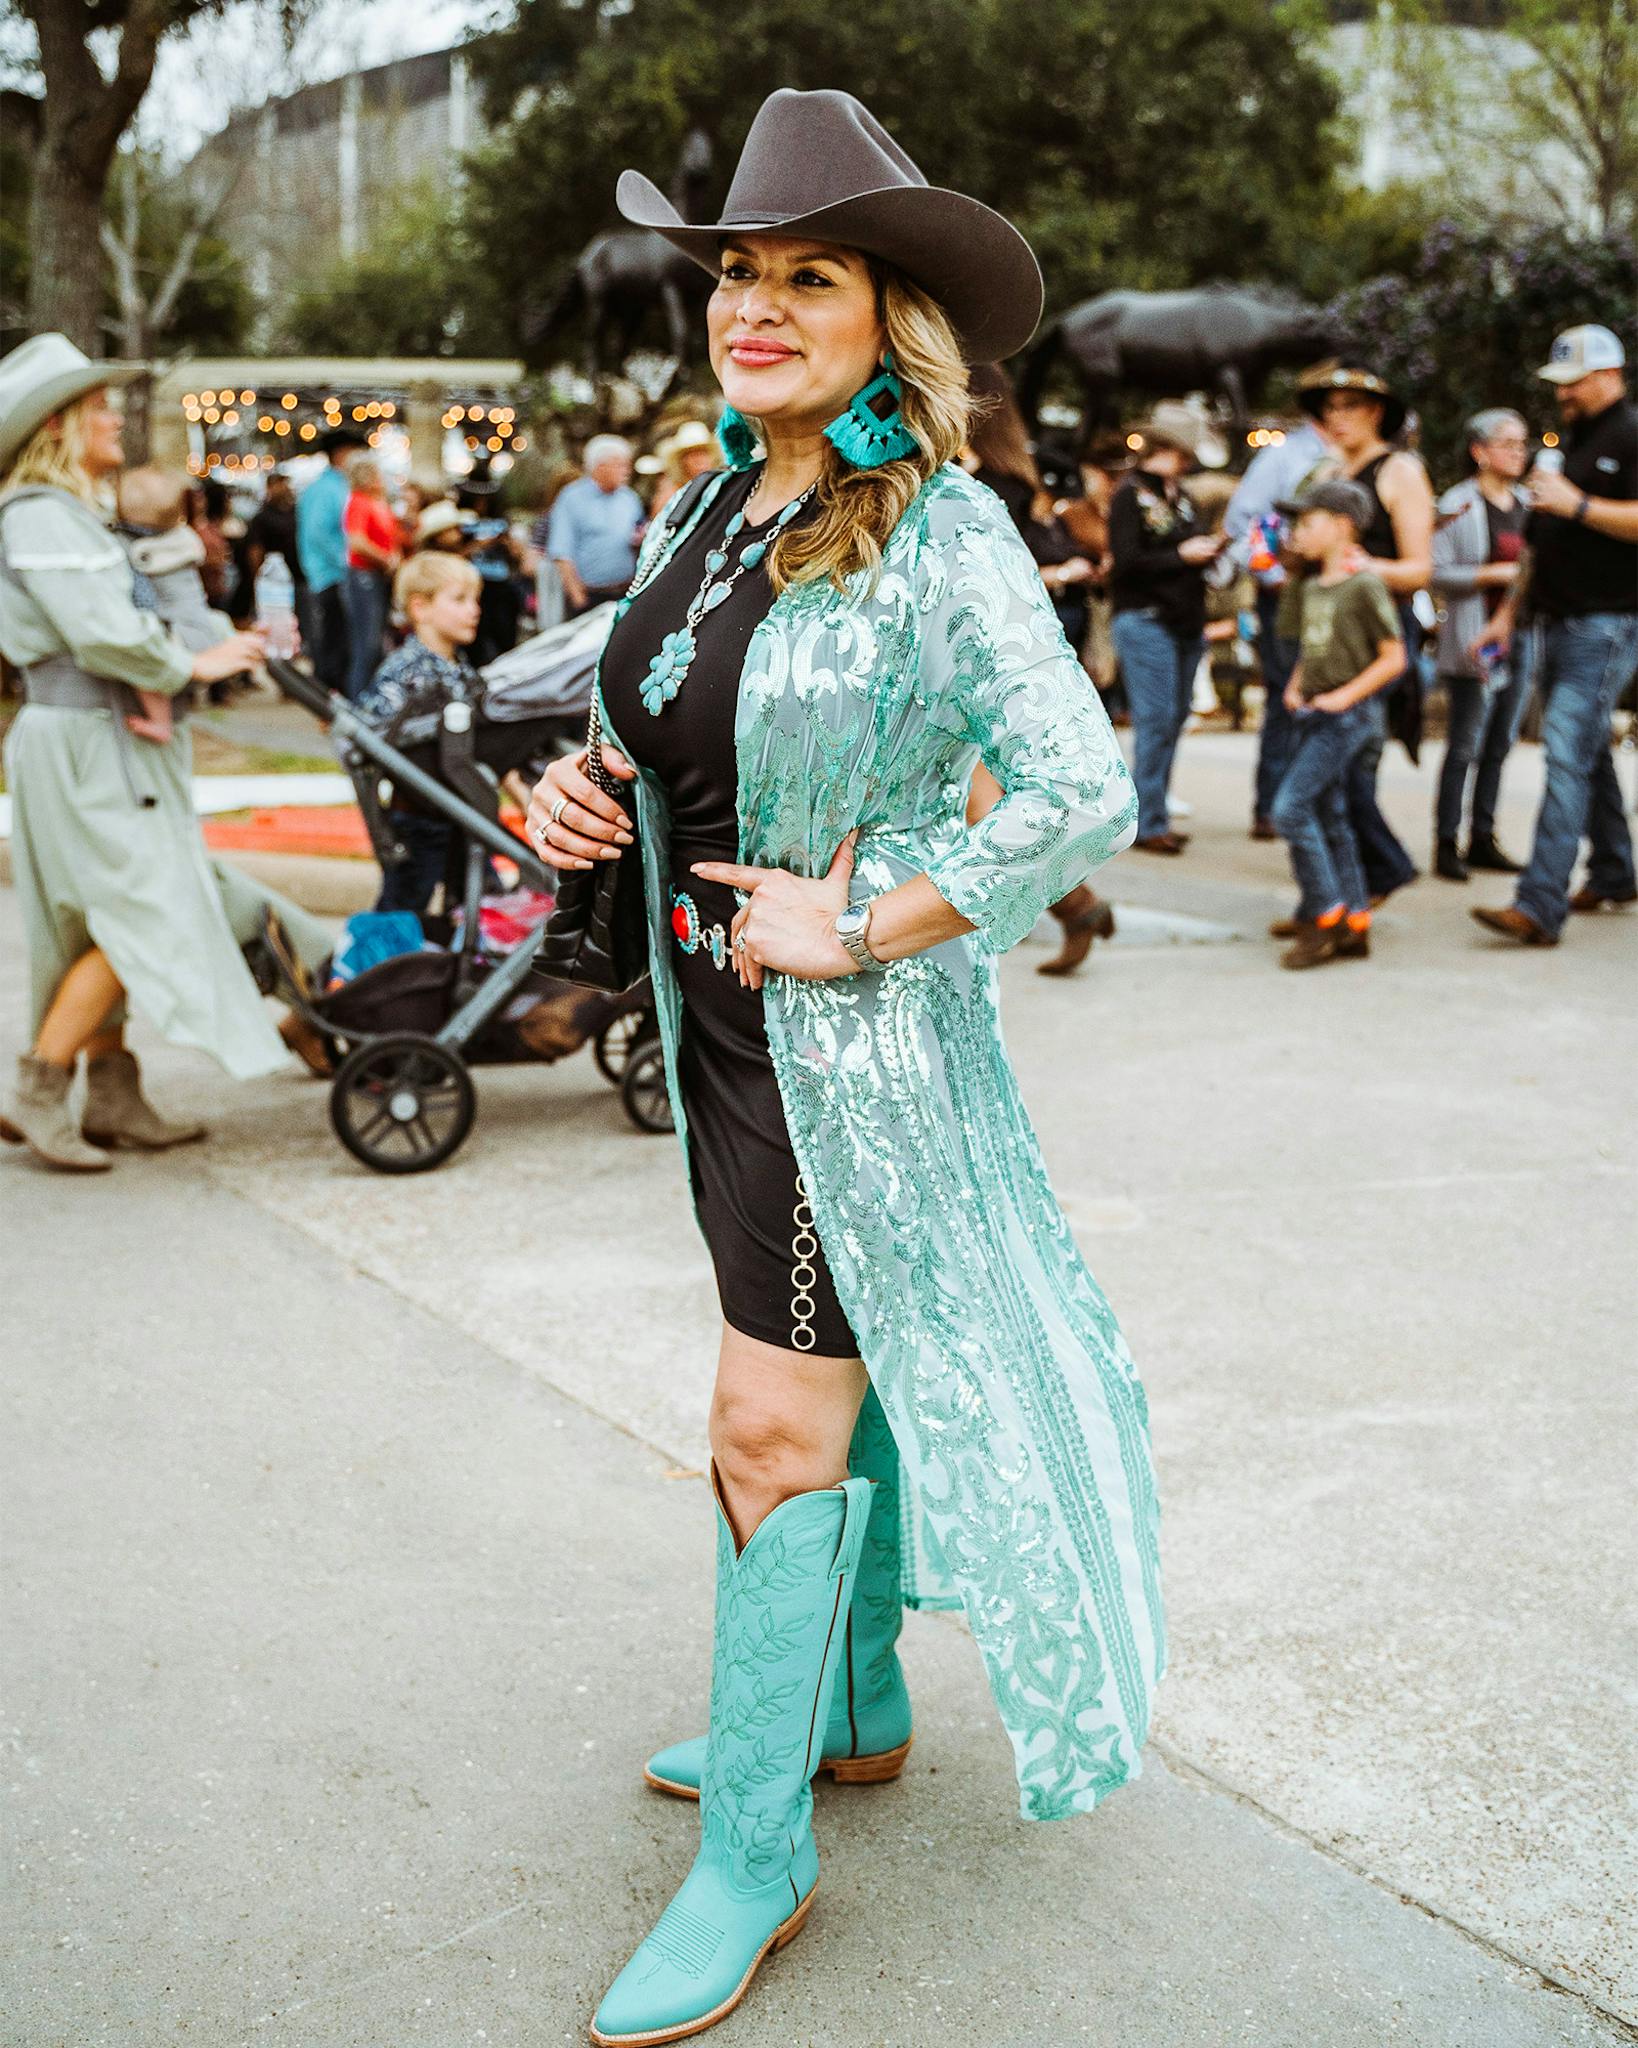 With so many accessories to coordinate, chromatically coherent looks were bound to ___ Tuesday night. Here, Jackie Rivera embraces turquoise, all the better to show off her statement necklace and standout boots.